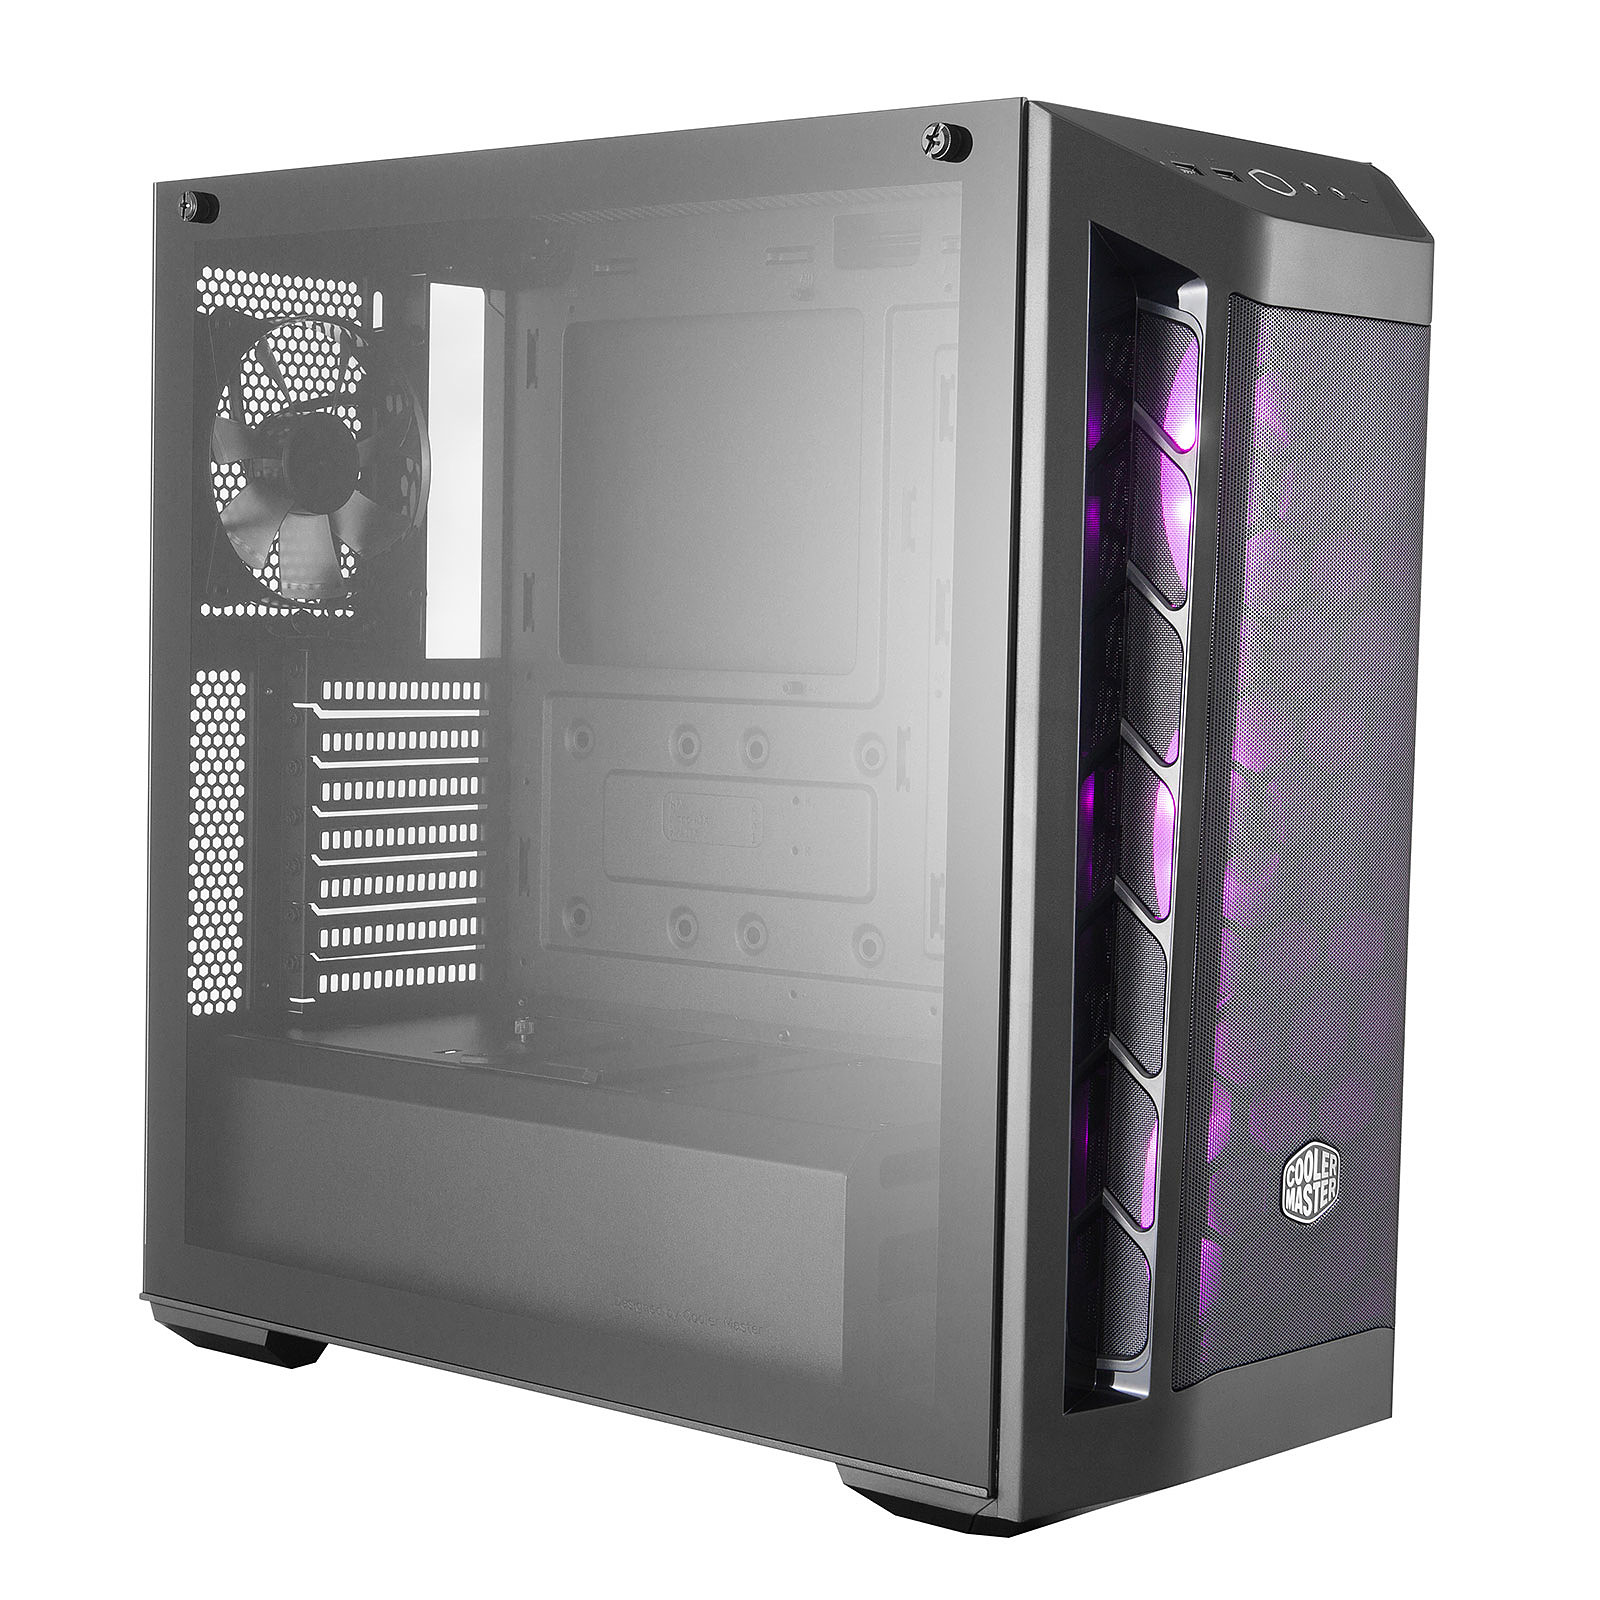 Cooler Master MasterBox MB511 RGB (Noir) · Occasion - Boitier PC Cooler Master Ltd - Occasion